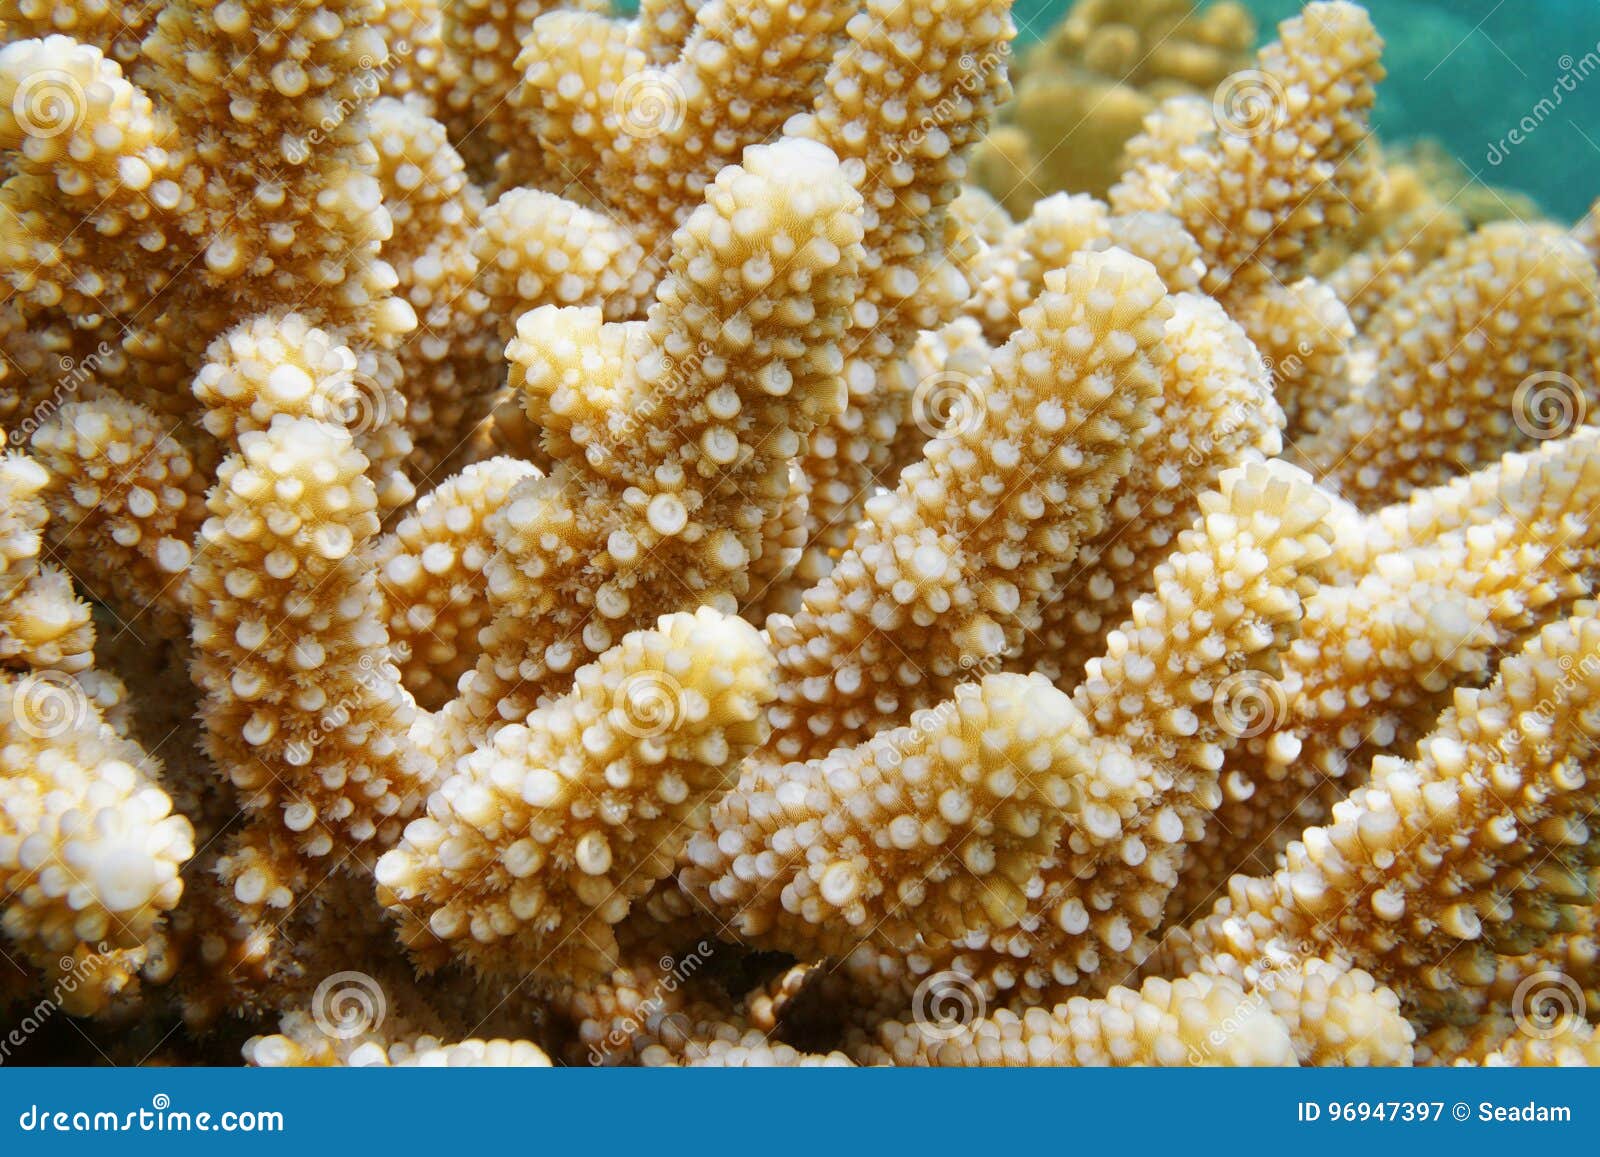 Finger Coral Acropora Humilis Pacific Ocean Stock Image - Image of ...